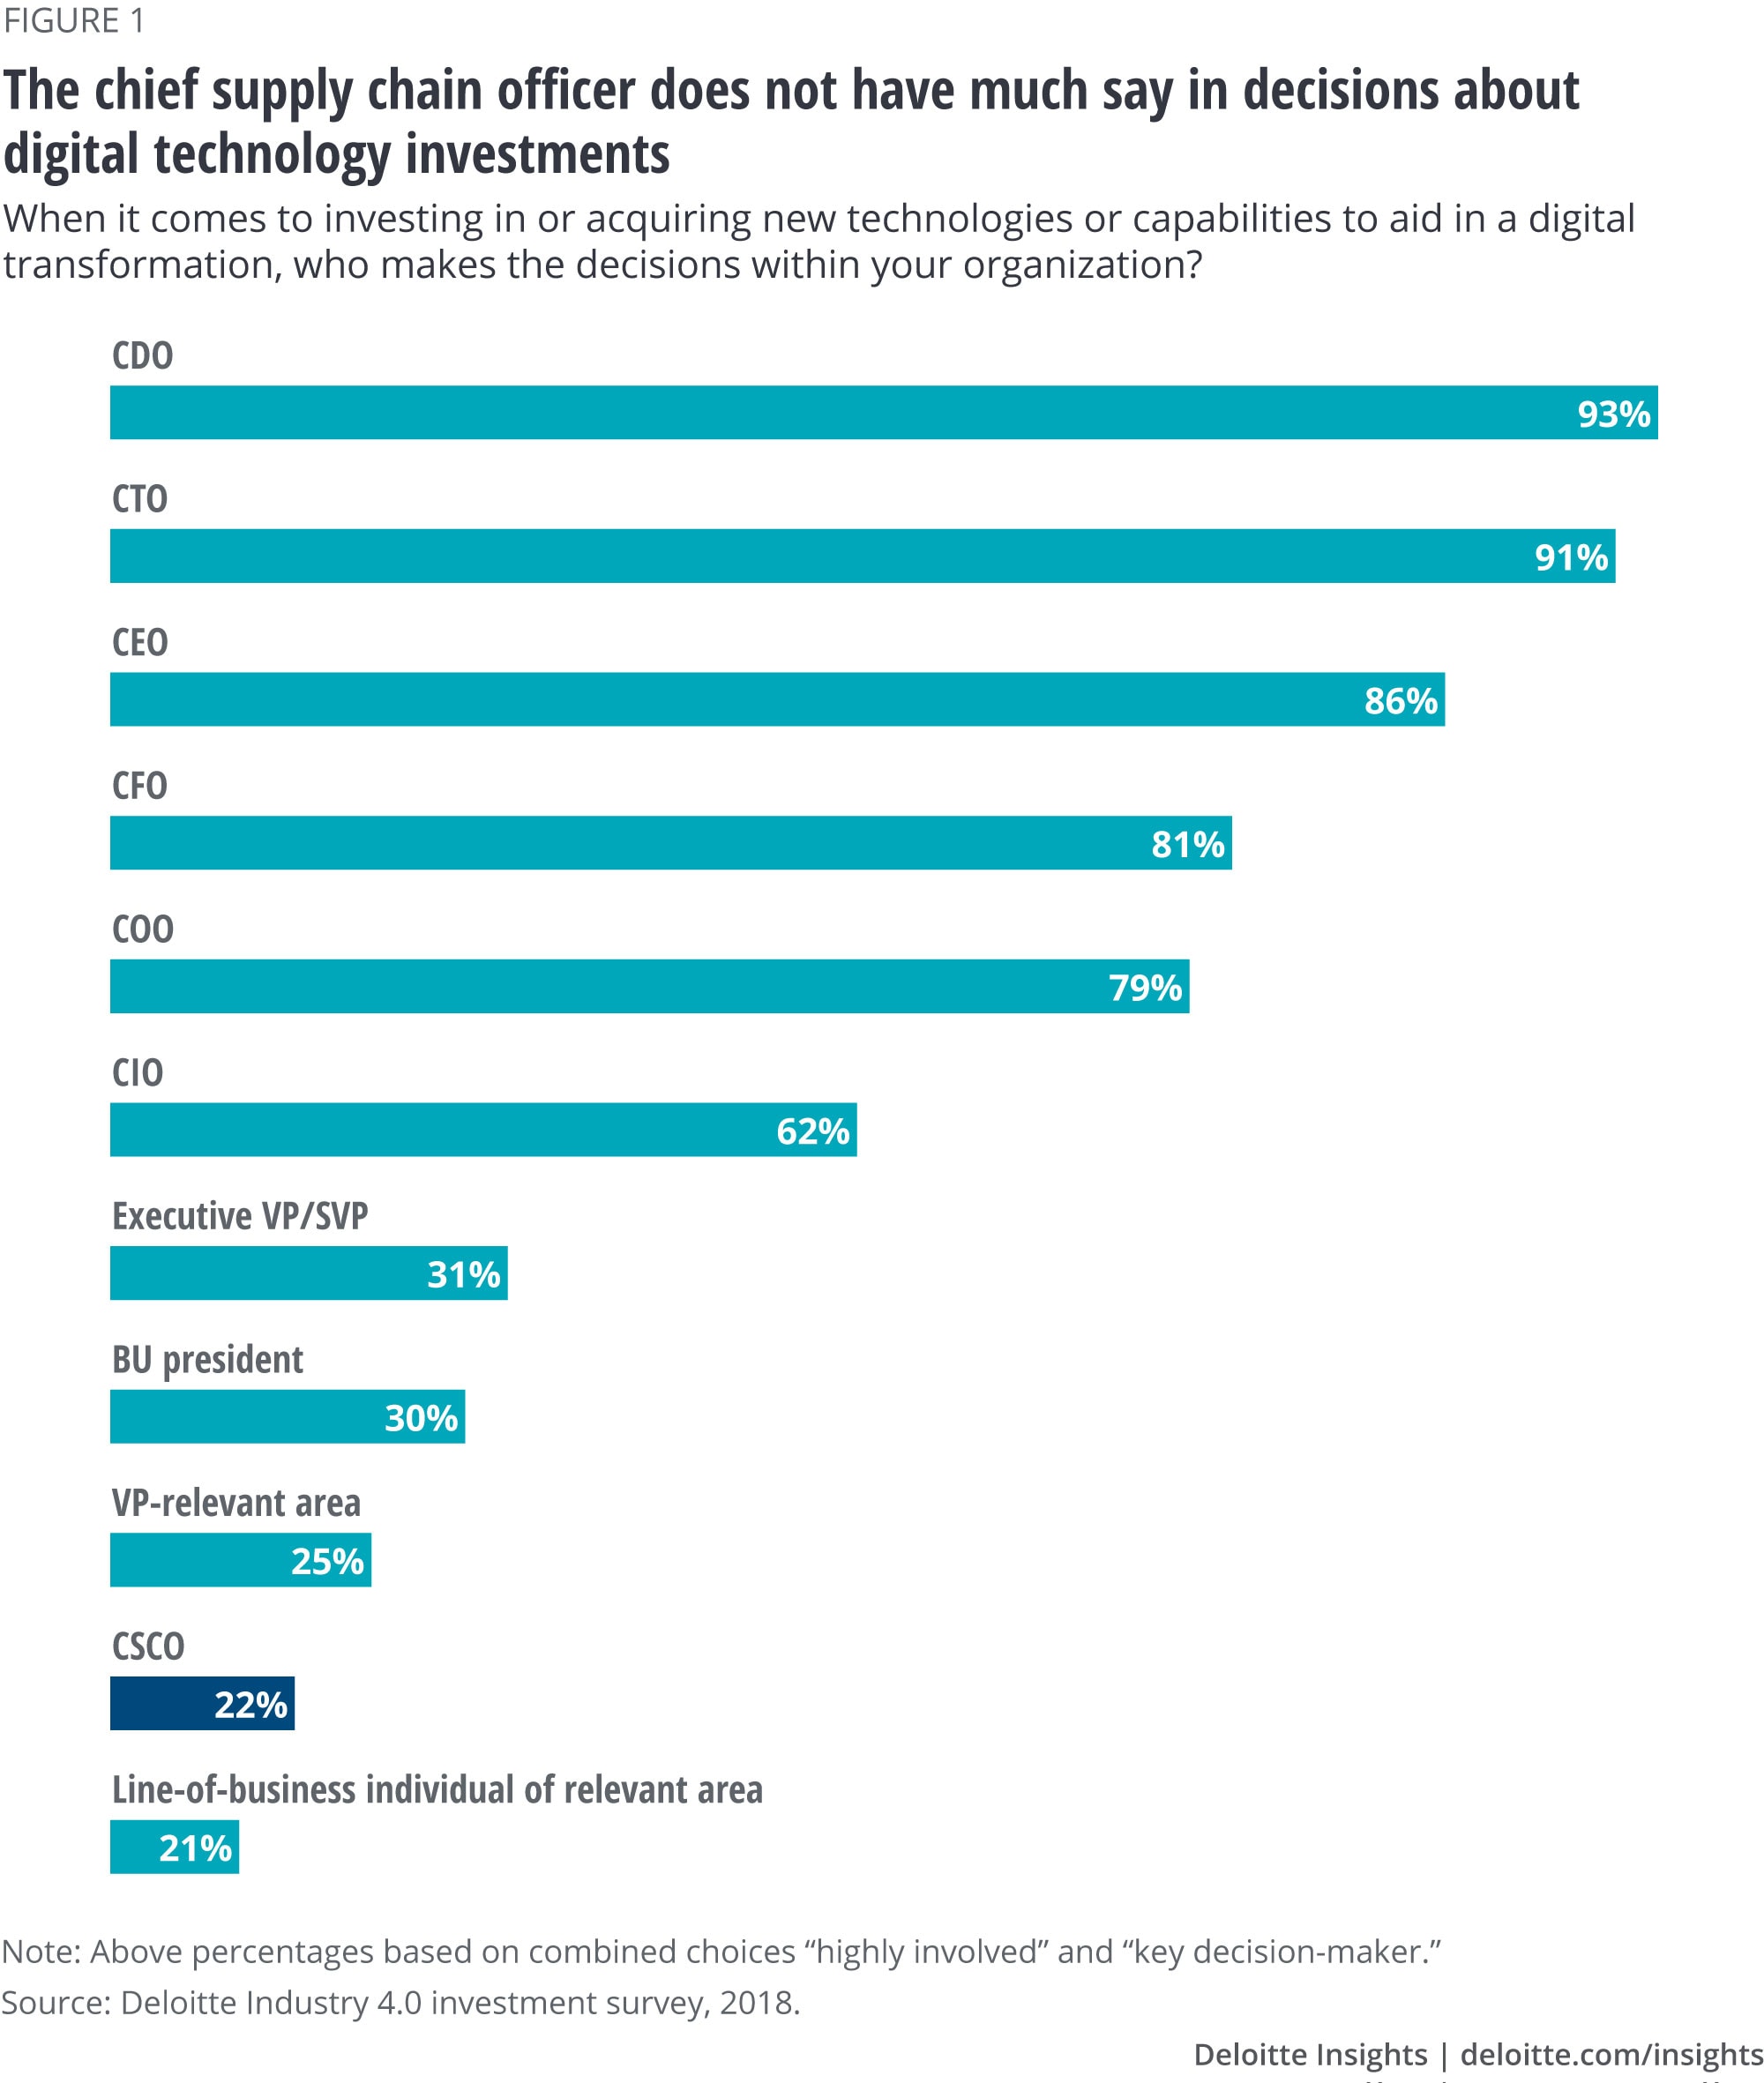 The chief supply chain officer does not have much say in decisions about digital technology investments